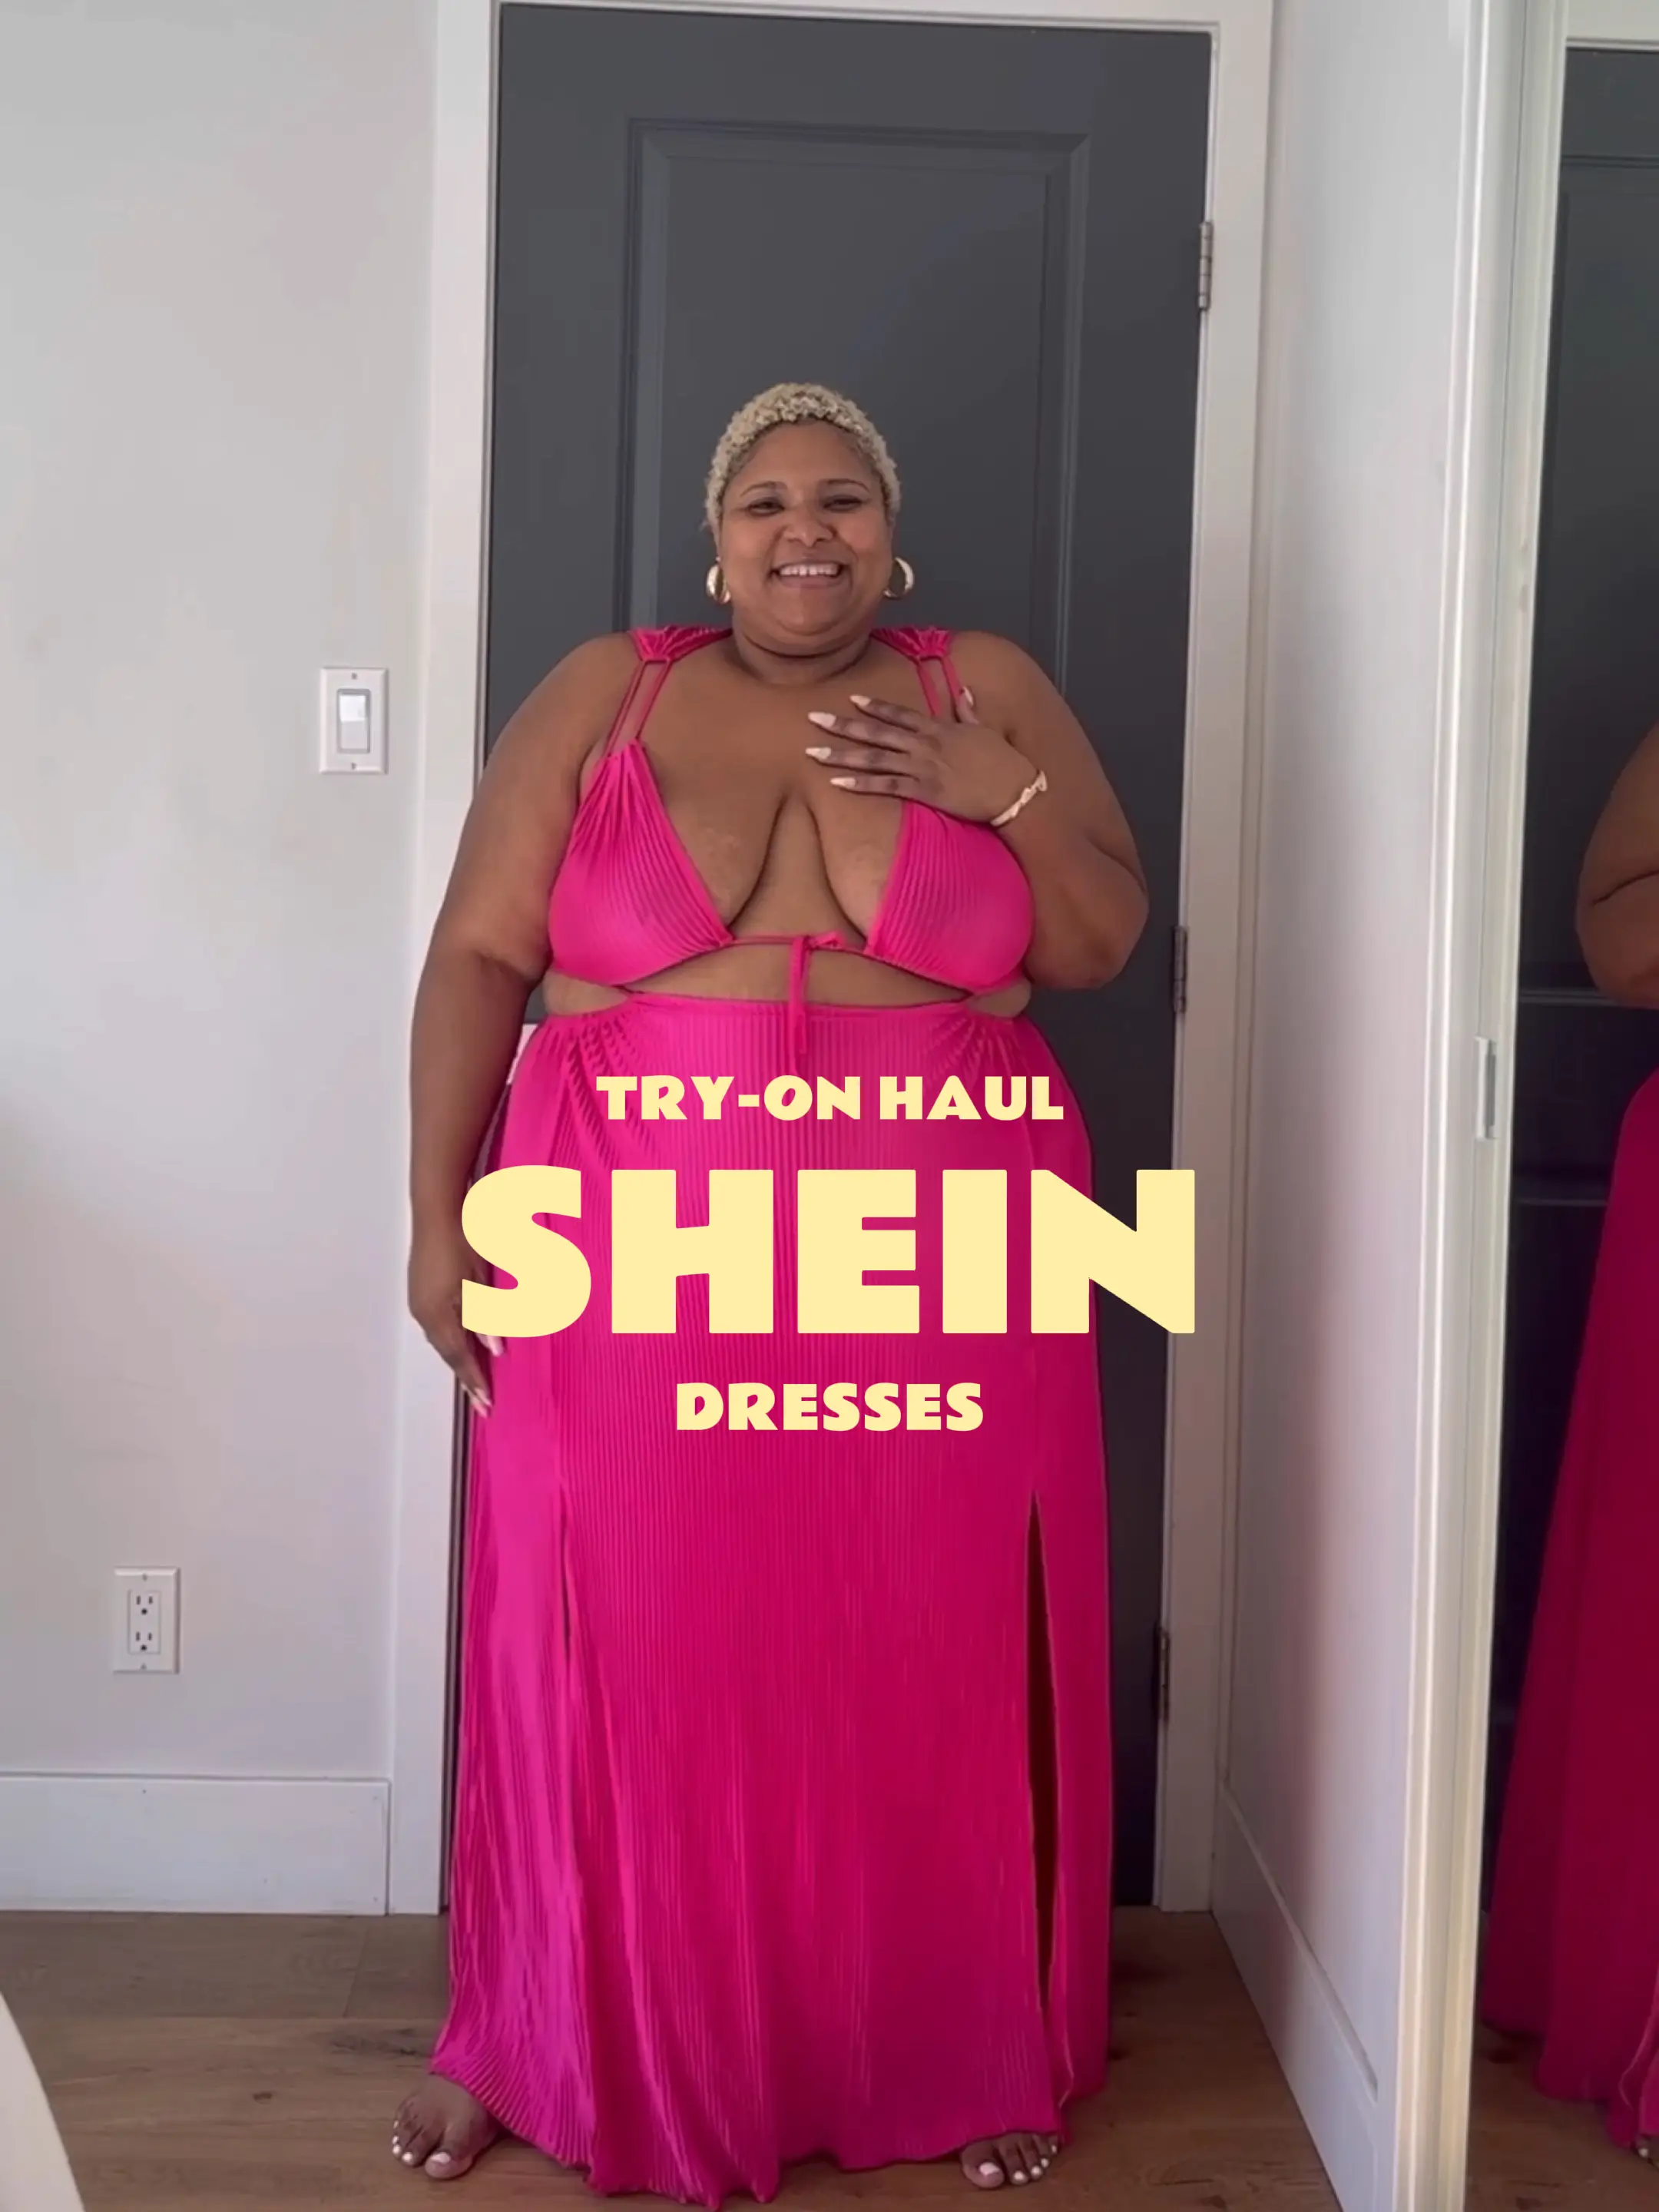 SHEIN TRY-ON HAUL, DRESSES